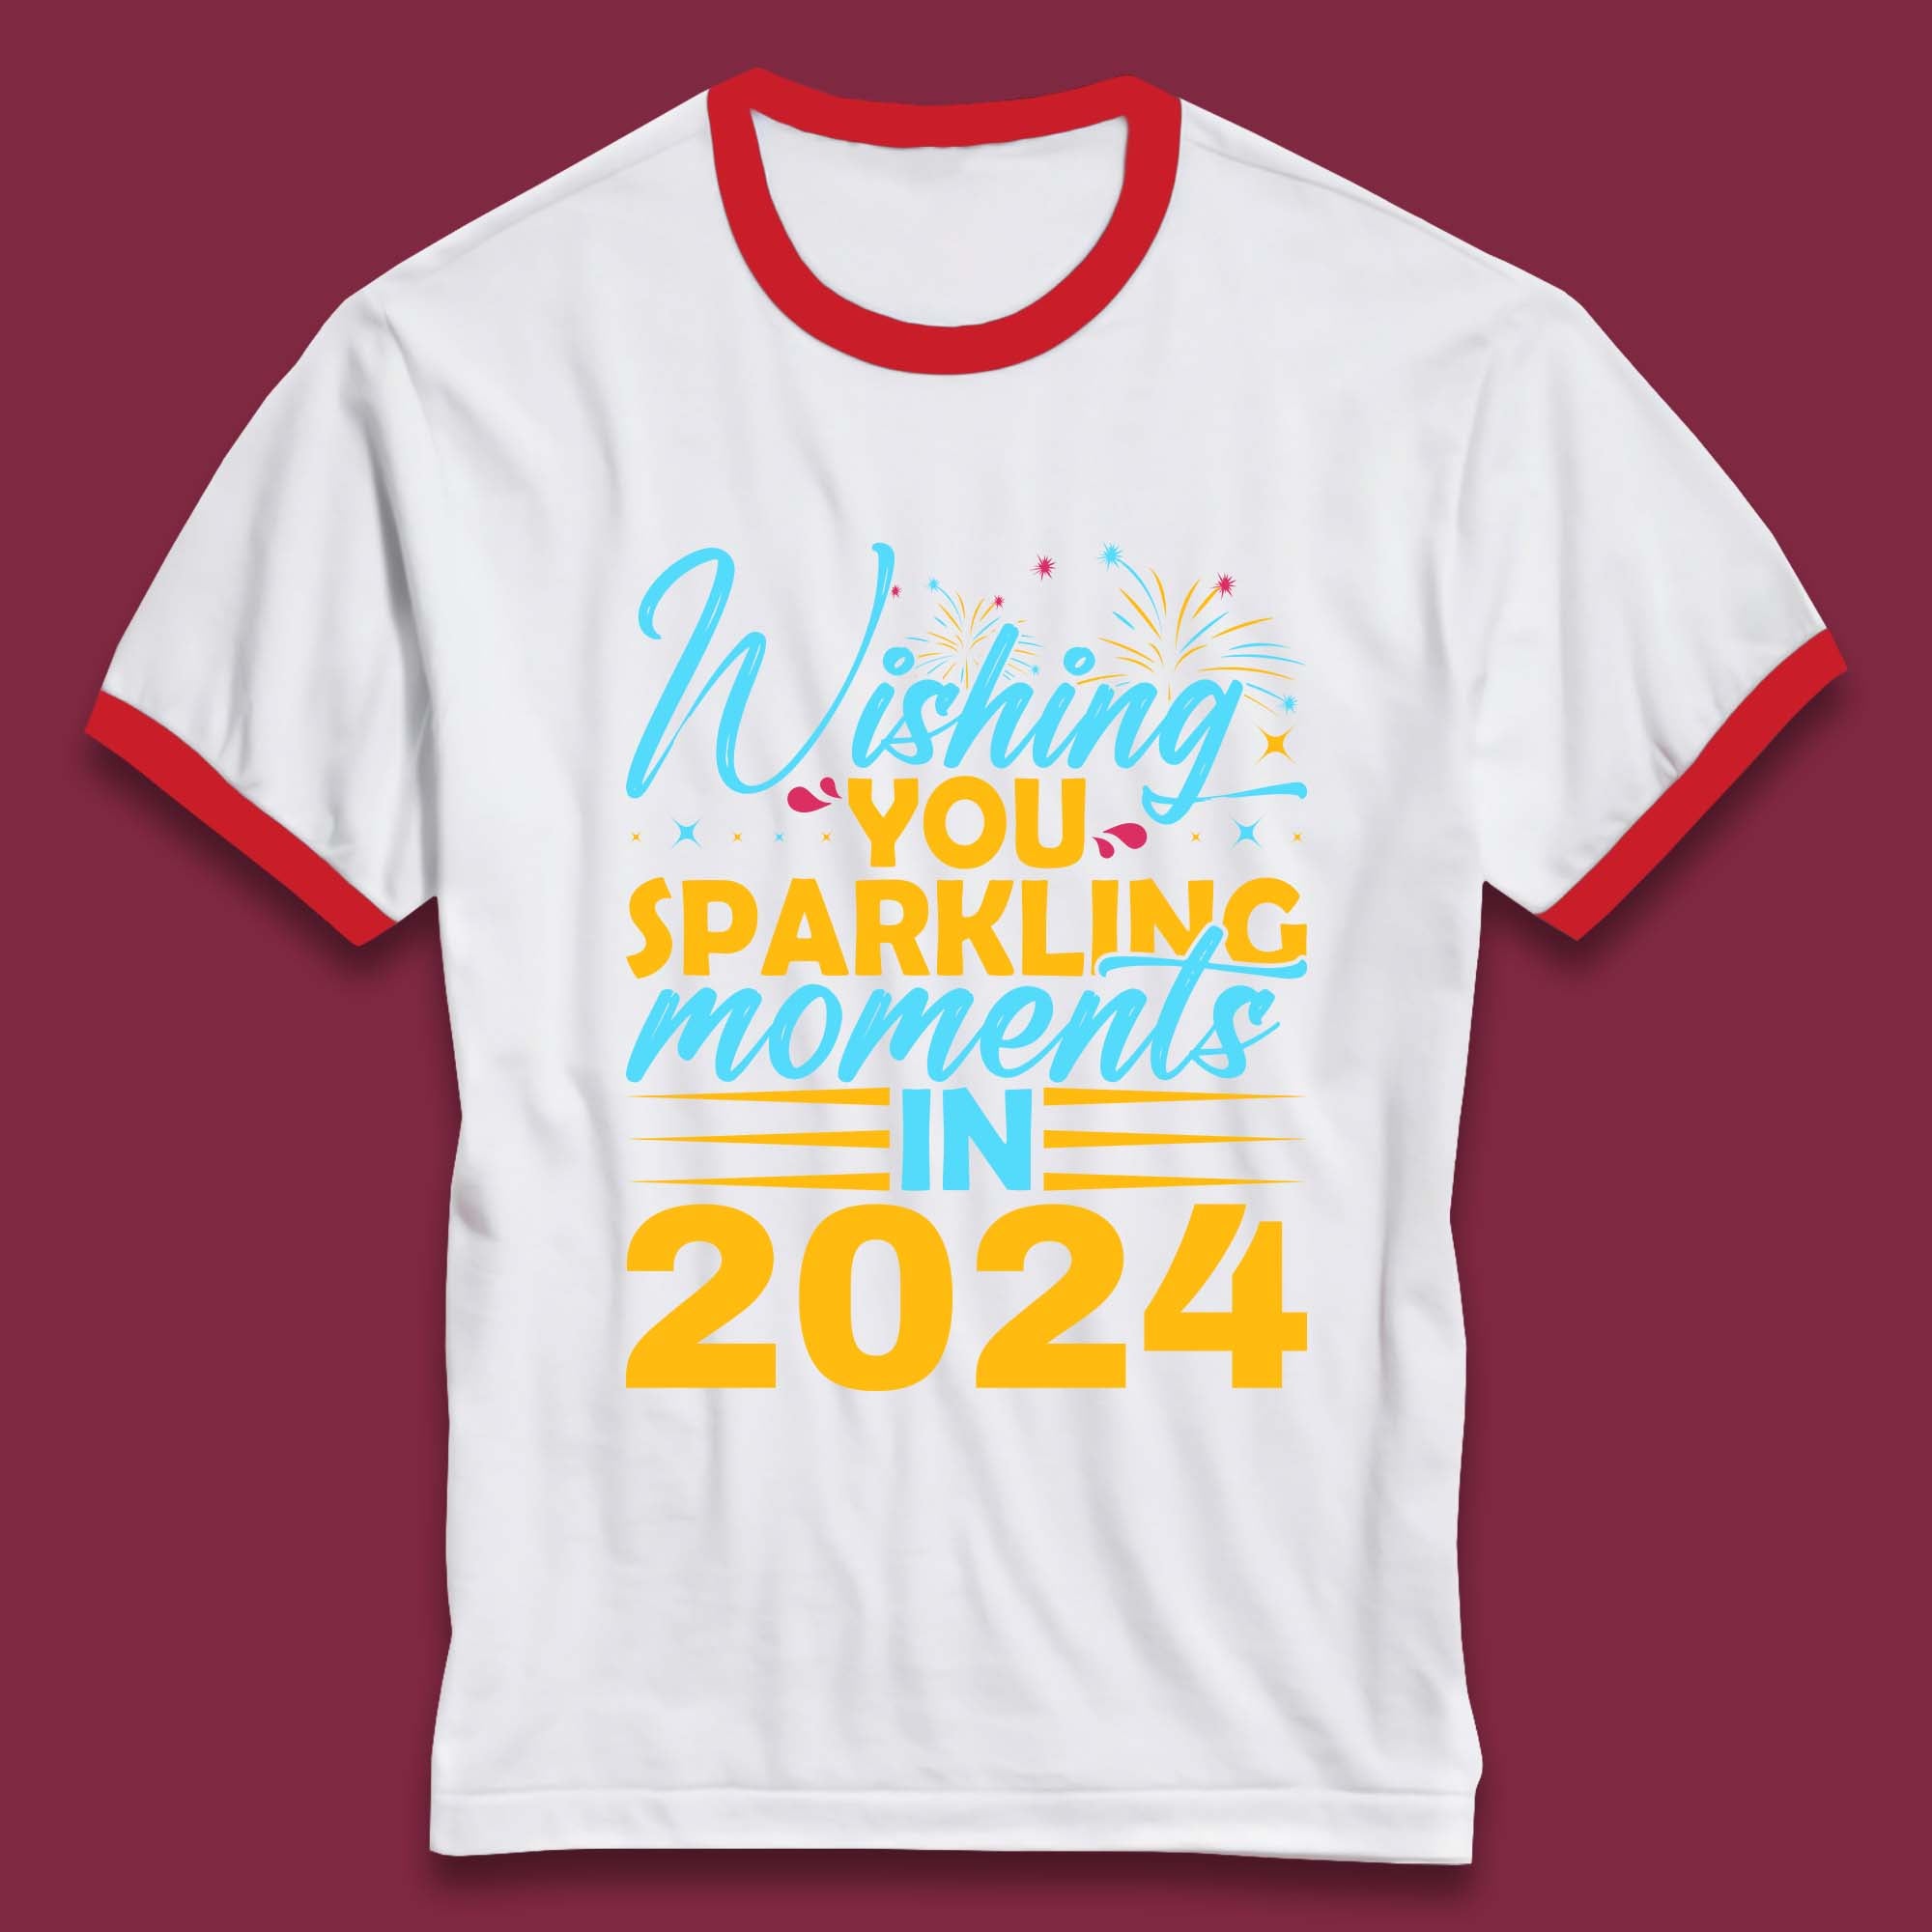 Wishing You Sparkling Moments in 2024 Ringer T-Shirt